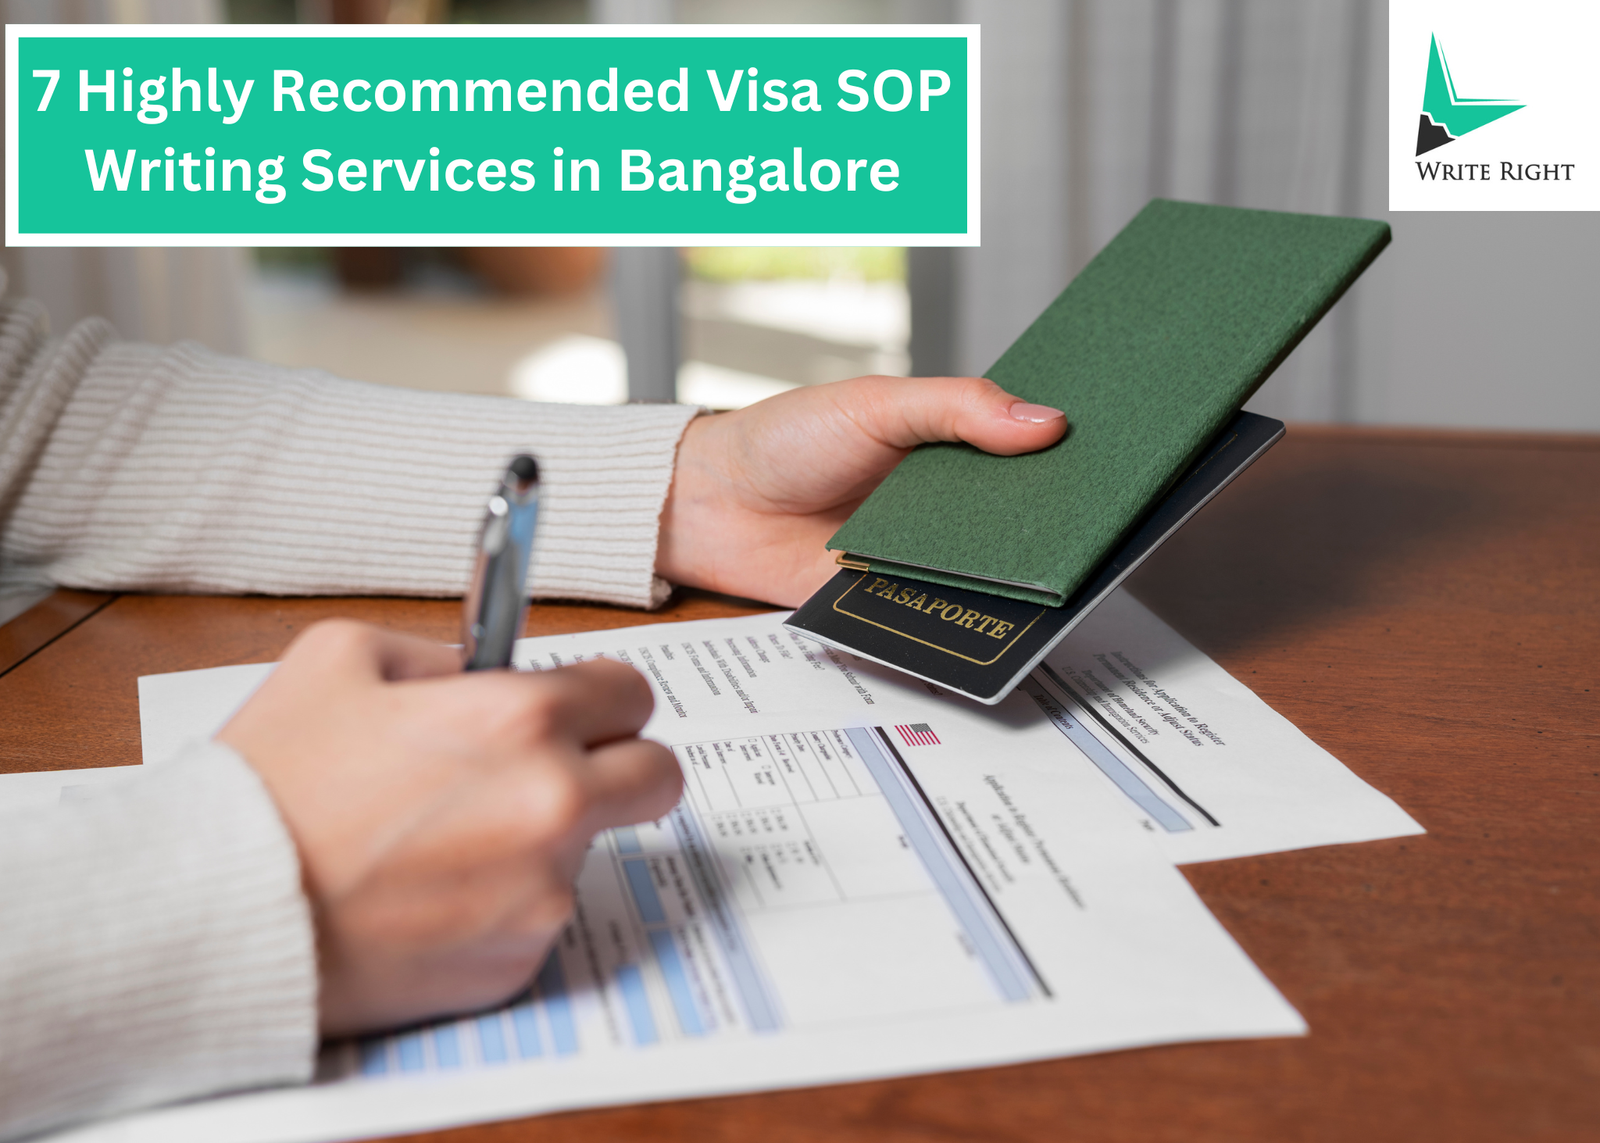 7 Highly Recommended Visa SOP Writing Services in Bangalore